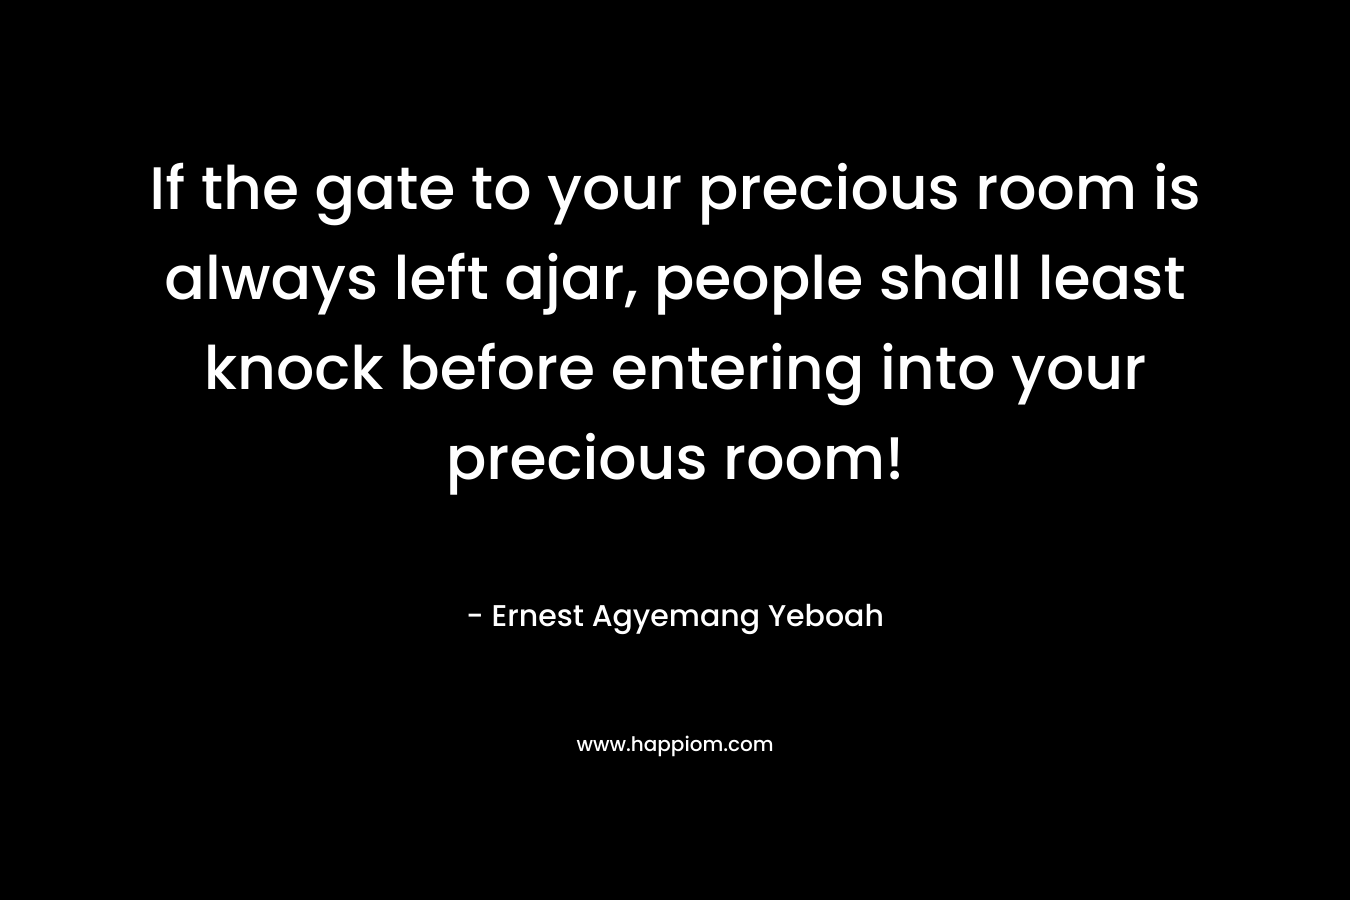 If the gate to your precious room is always left ajar, people shall least knock before entering into your precious room!